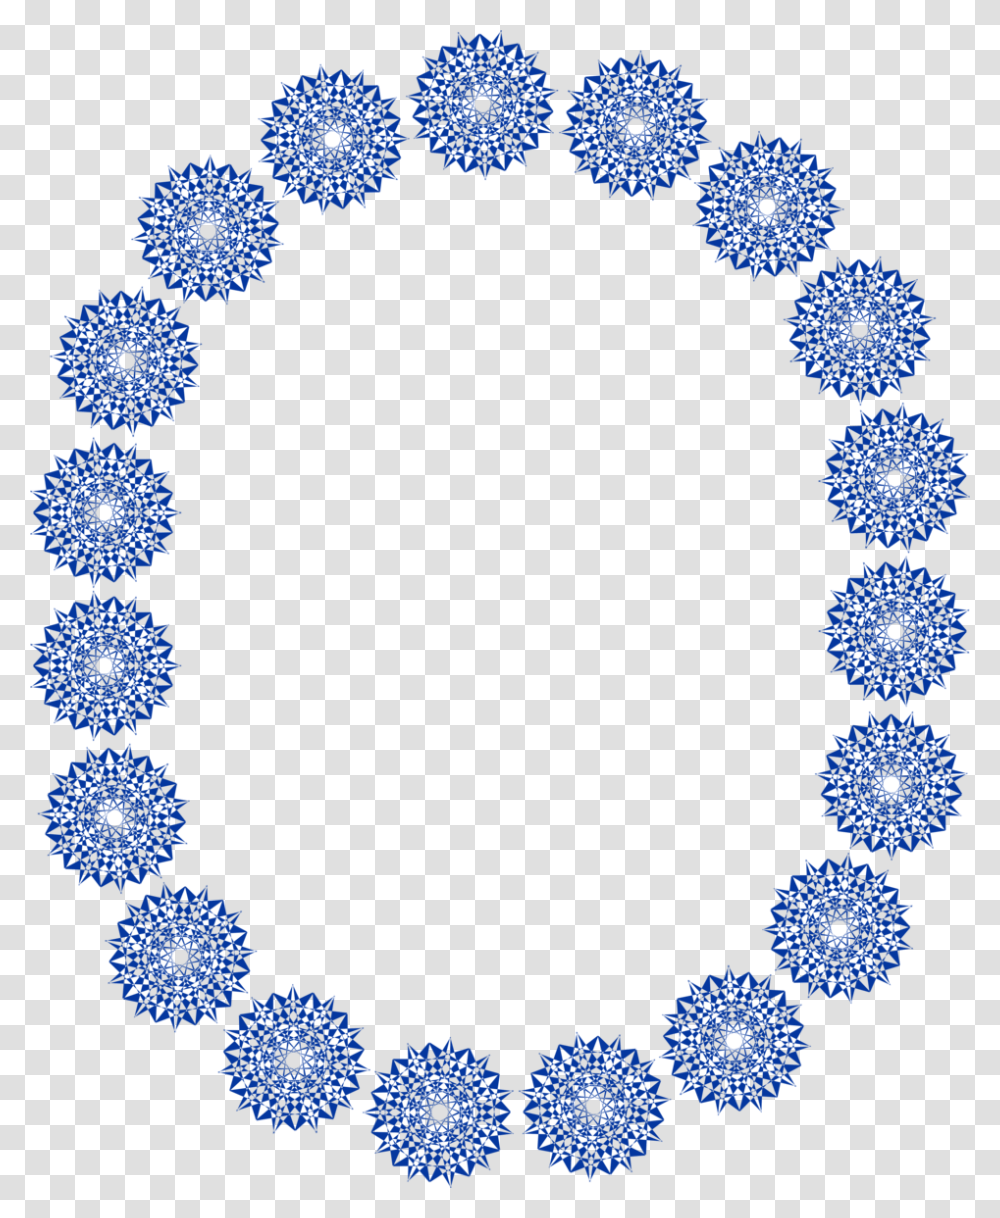 Blue Star Corner Clipart Jpg Royalty Free Stock Border Circle Monogram With Circles Around, Rug, Pattern, Oval Transparent Png